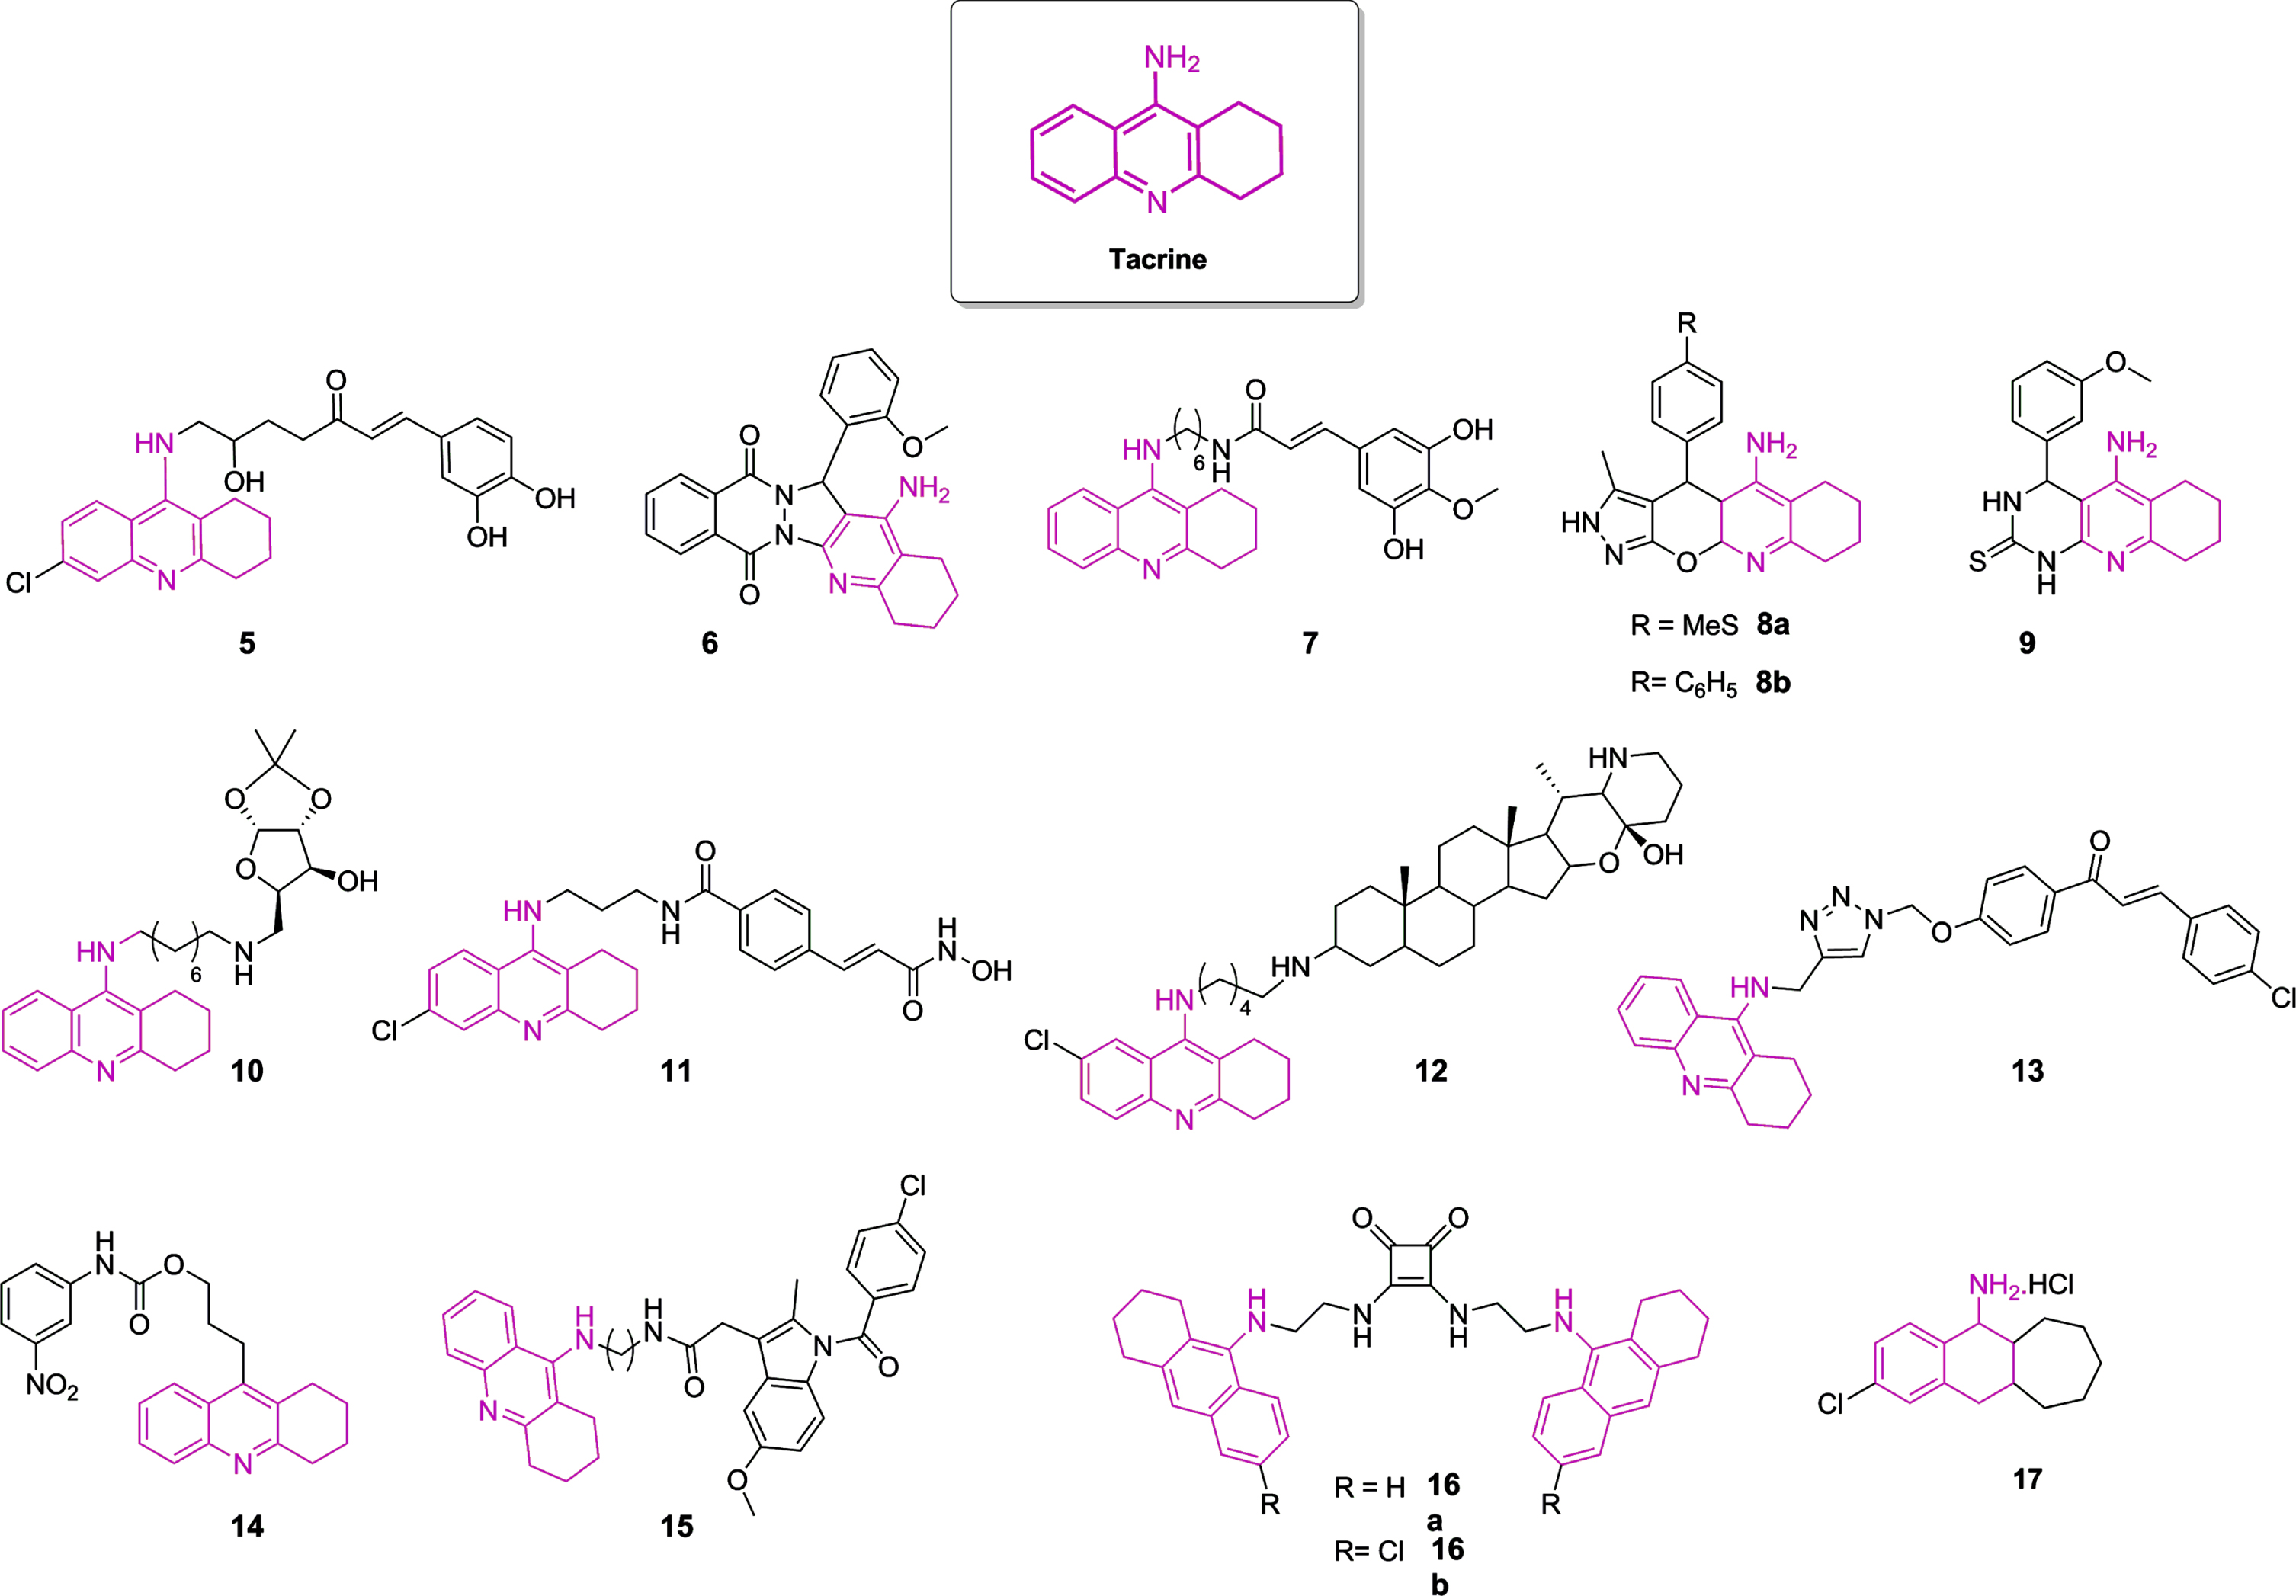 Chemical structure of tacrine and most potent tacrine-based hybrids as ChE inhibitors described in the last years. The color pink highlights the 1,2,3,4-tetrahydroakridin-9-amine rings as derivatives in each structure.